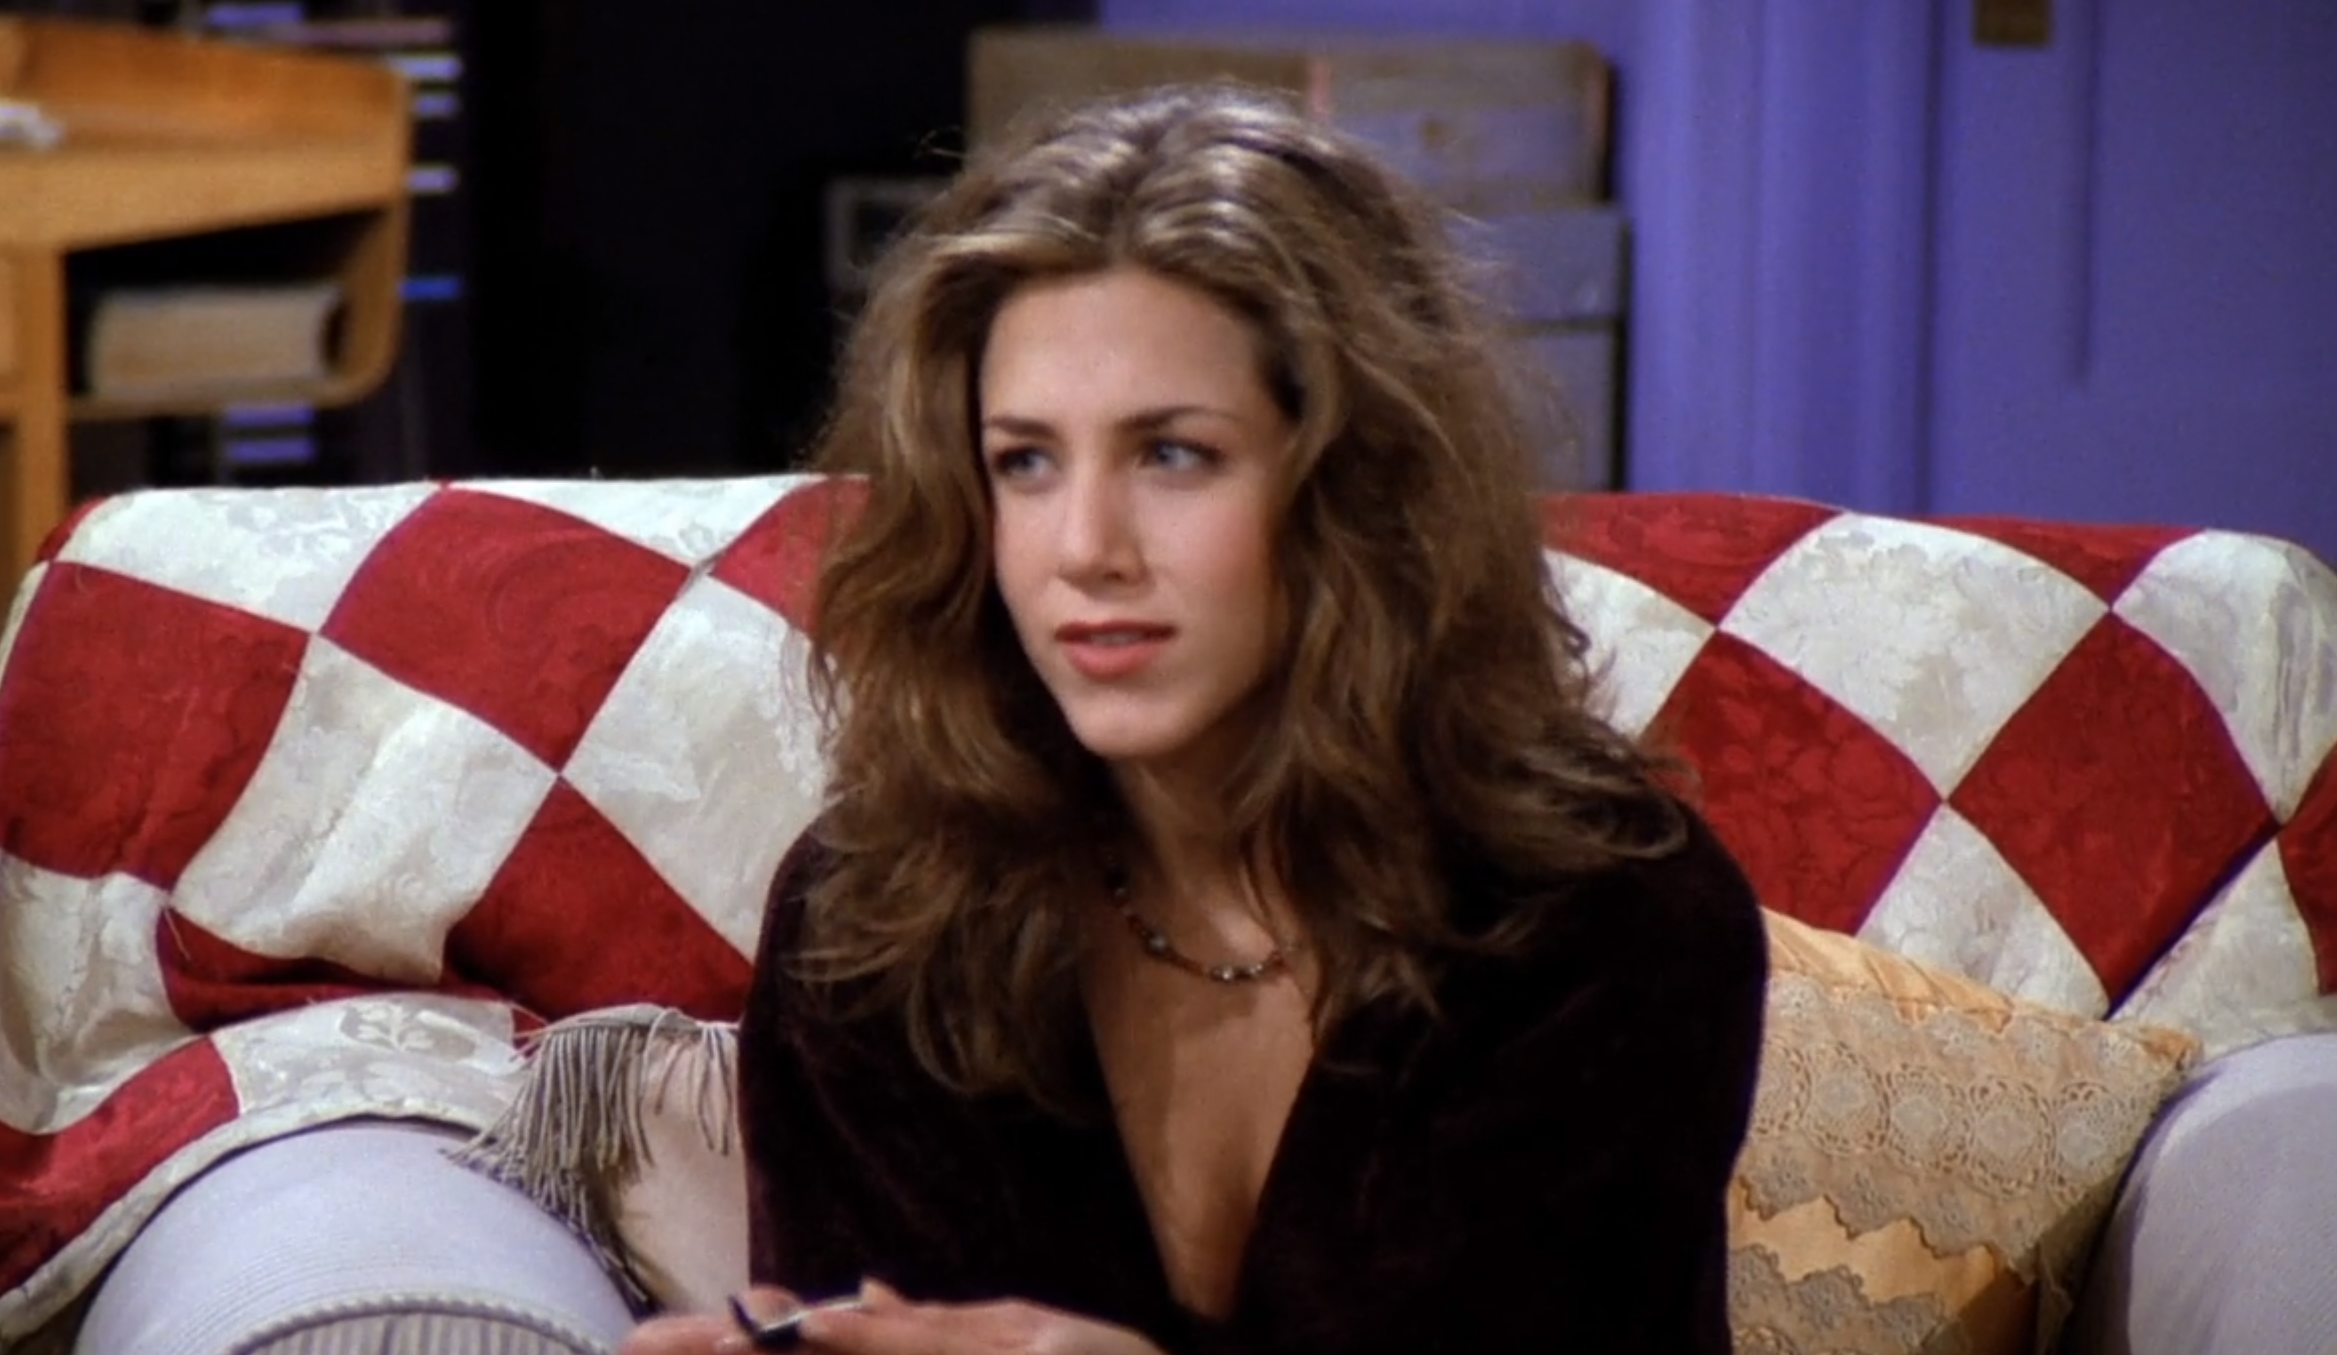 Rachel Green's Most Stylish Looks Ever on Friends - TV Guide